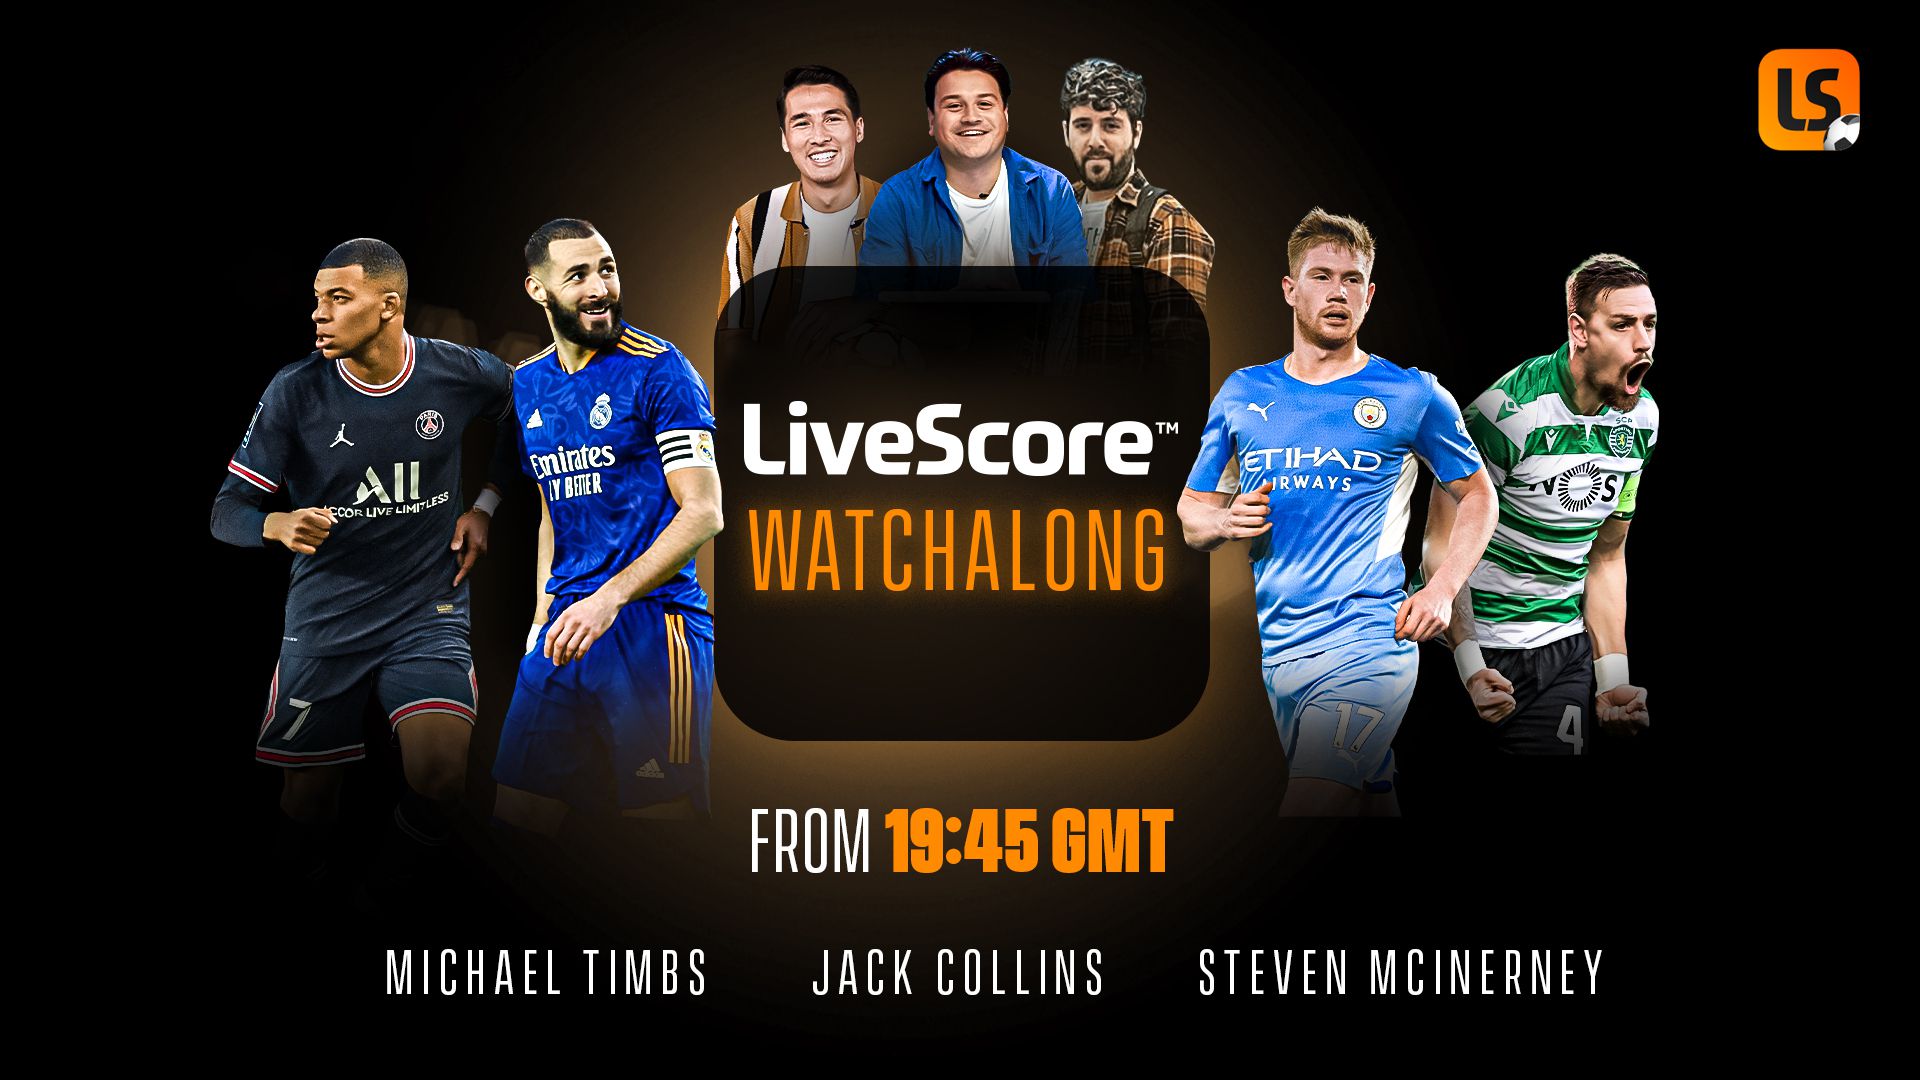 Follow the Champions League action with LiveScore Watchalong LiveScore